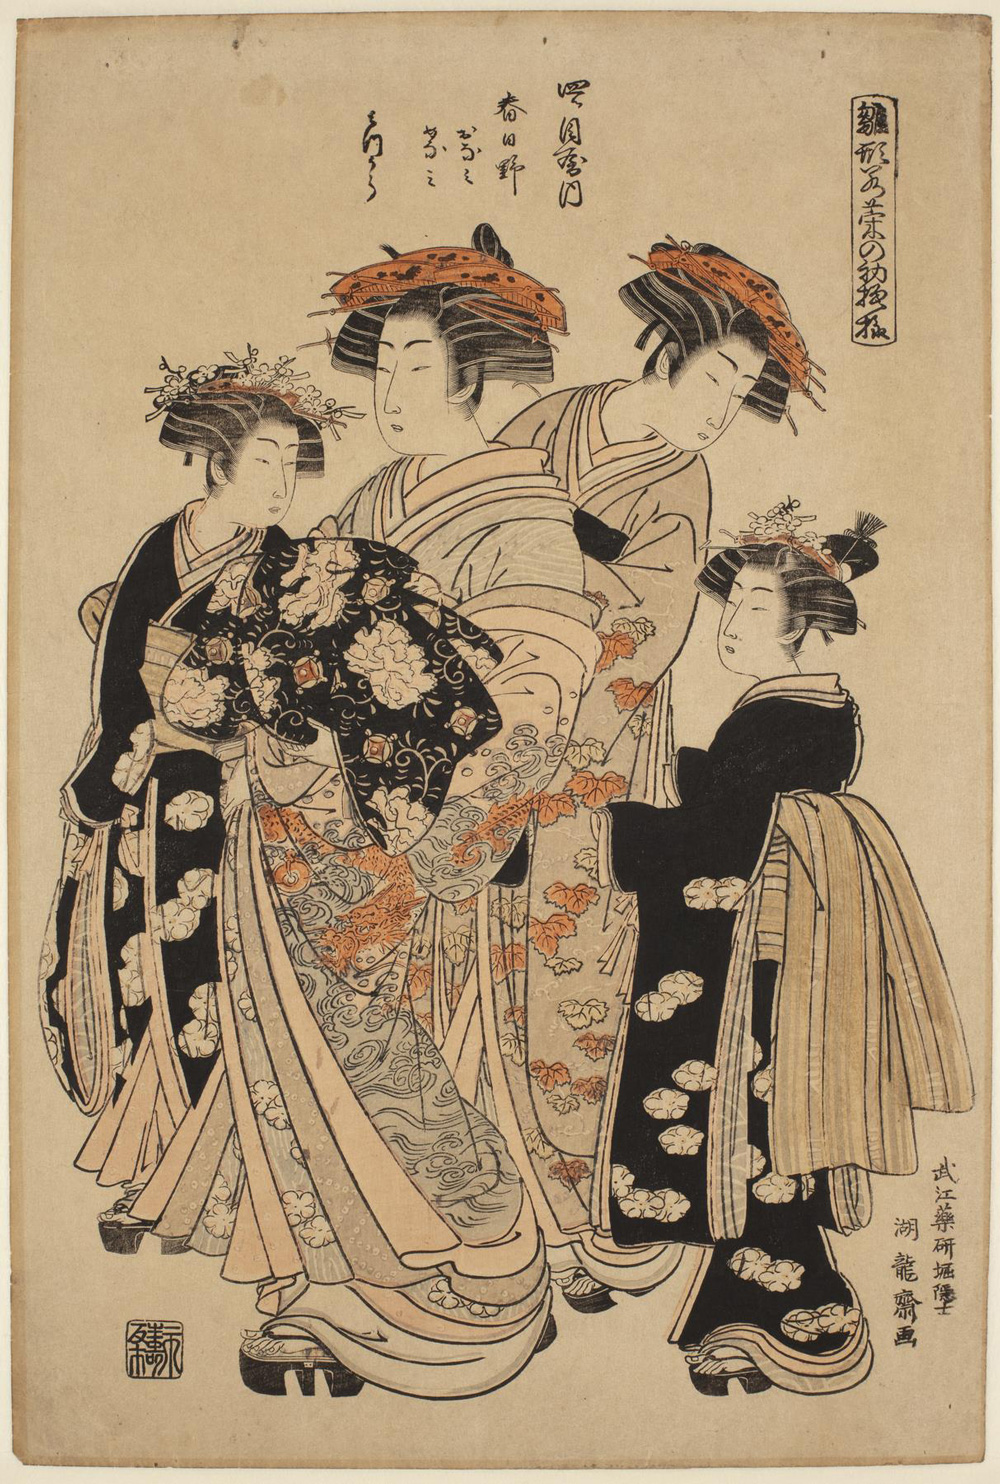 Japanese print of four women standing and dressed in traditional robes. They are wearing platform shoes.